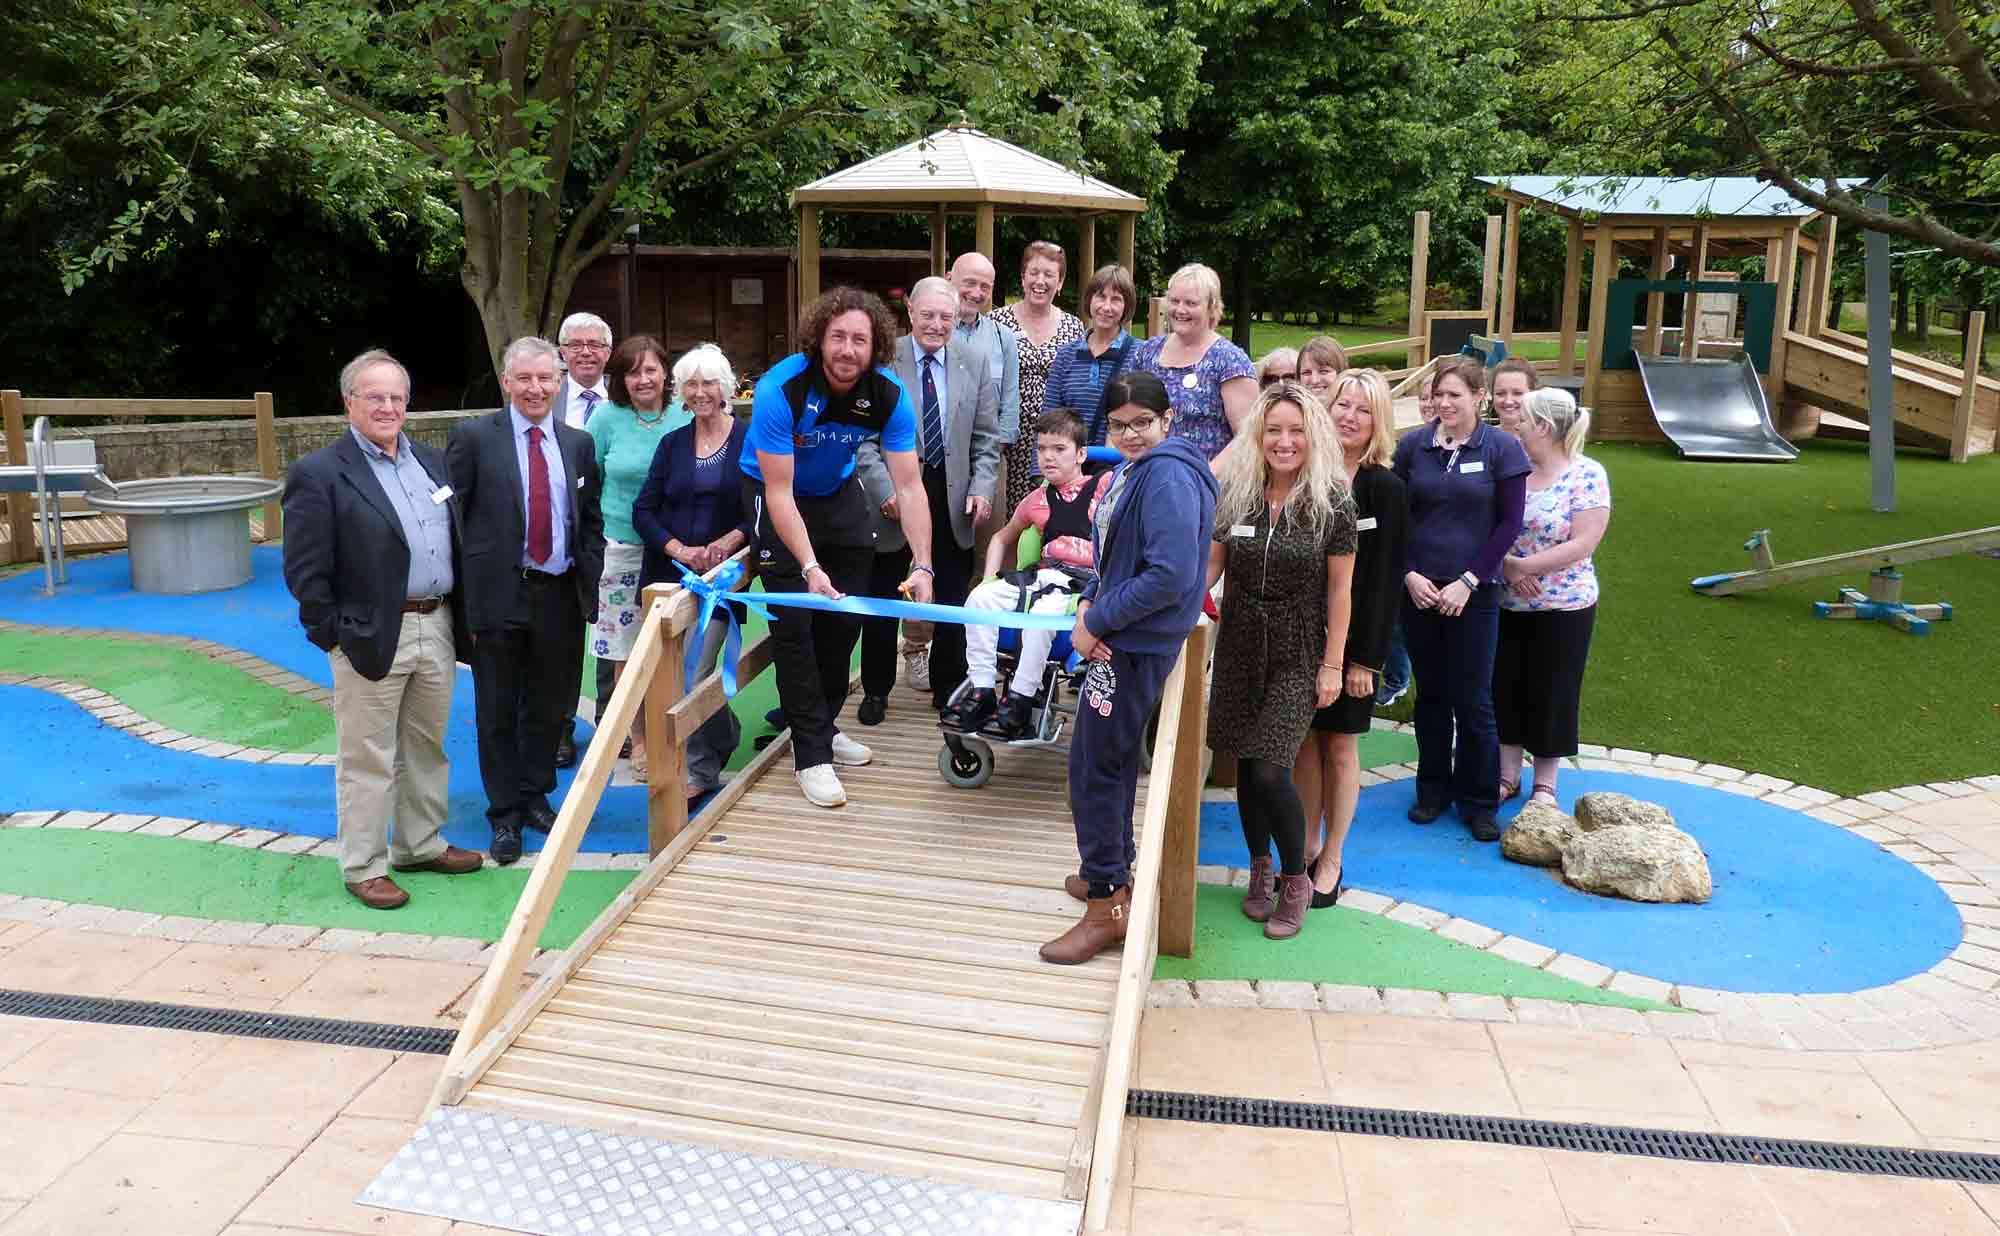 Yorkshire cricketer and Martin House Ambassador, Ryan Sidebottom officially opened the newly refurbished outdoor play facilities at Martin House Hospice